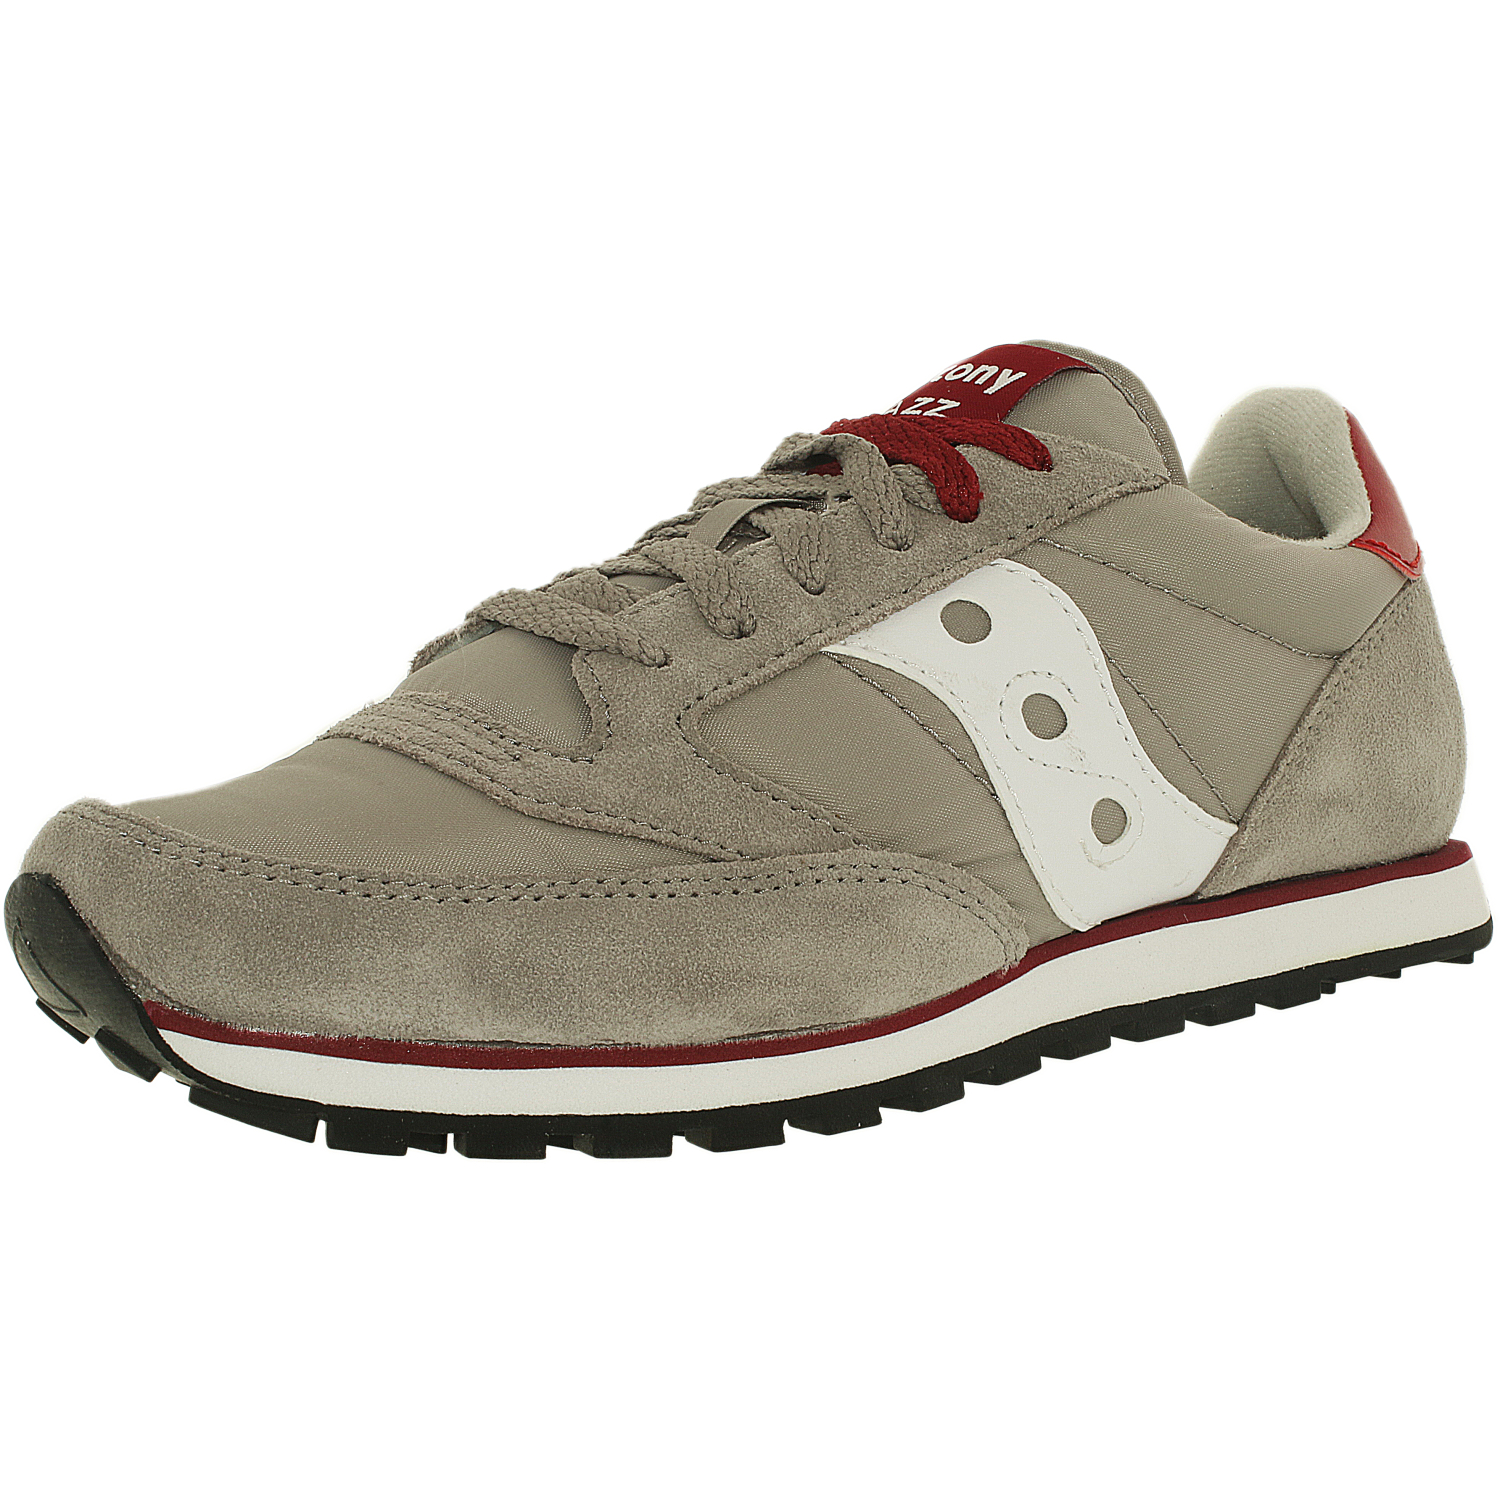 Saucony Men's Jazz Low Pro Ankle-High Leather Fashion Sneaker